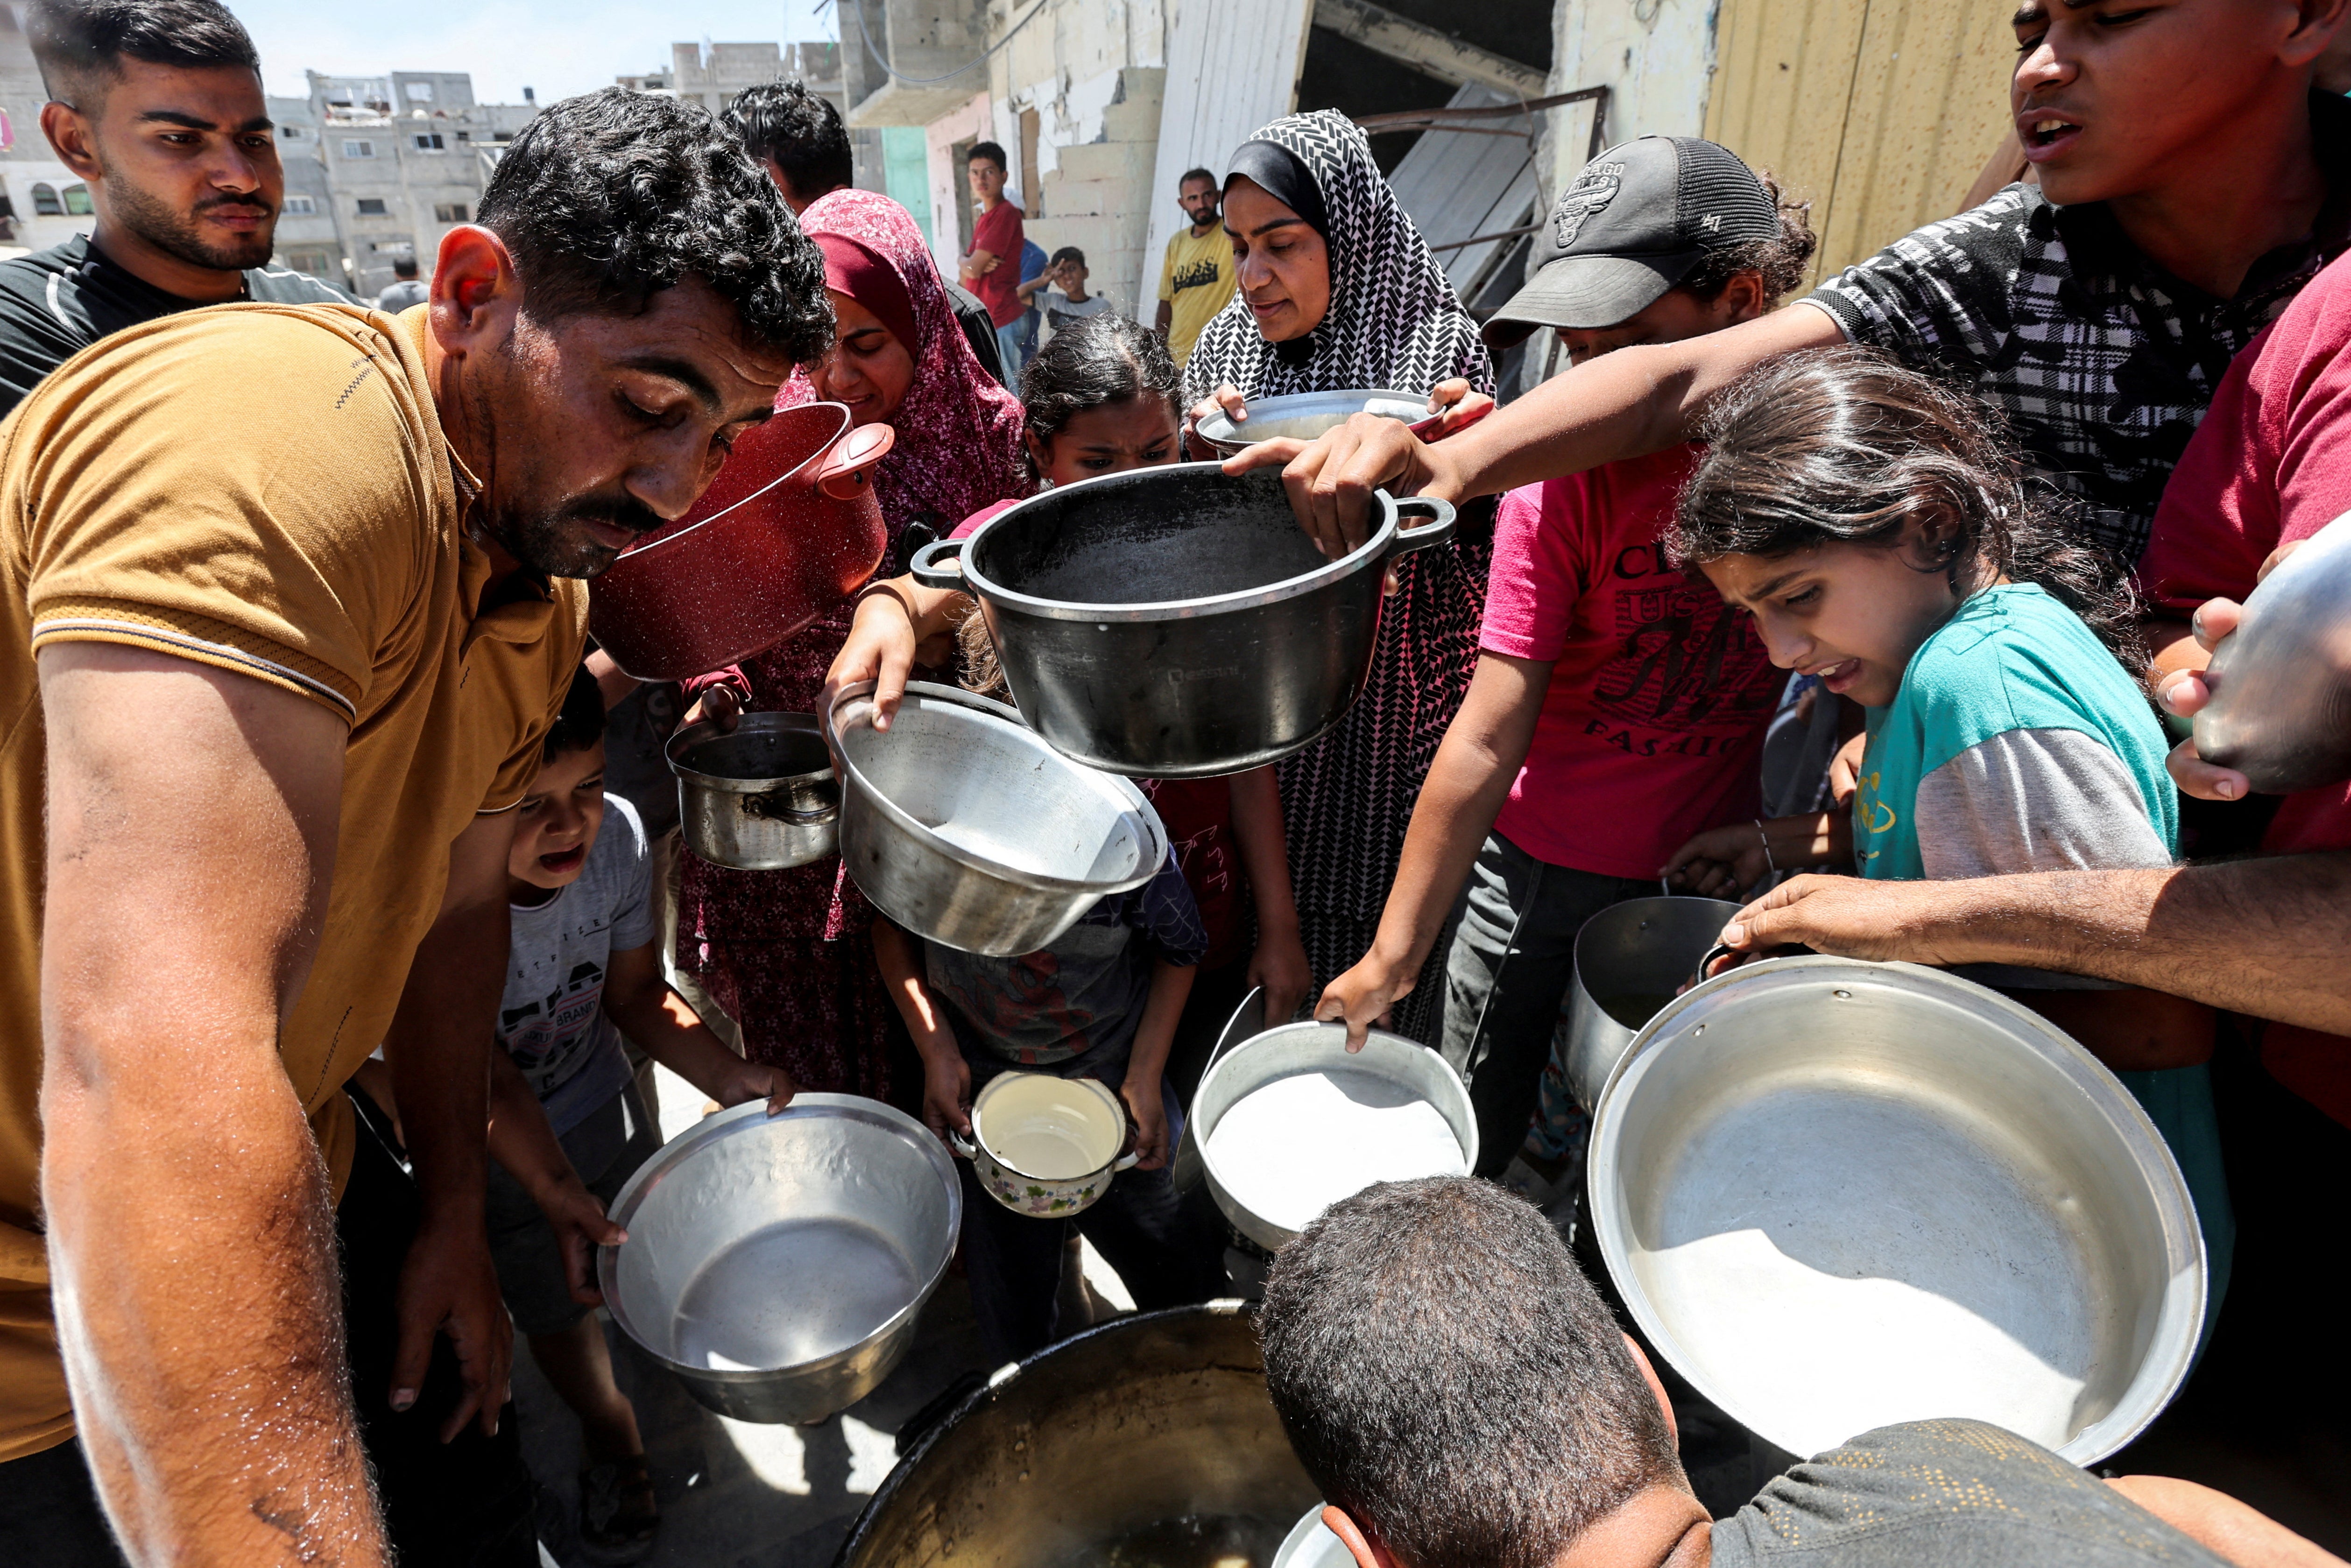 Families in Gaza are struggling for food